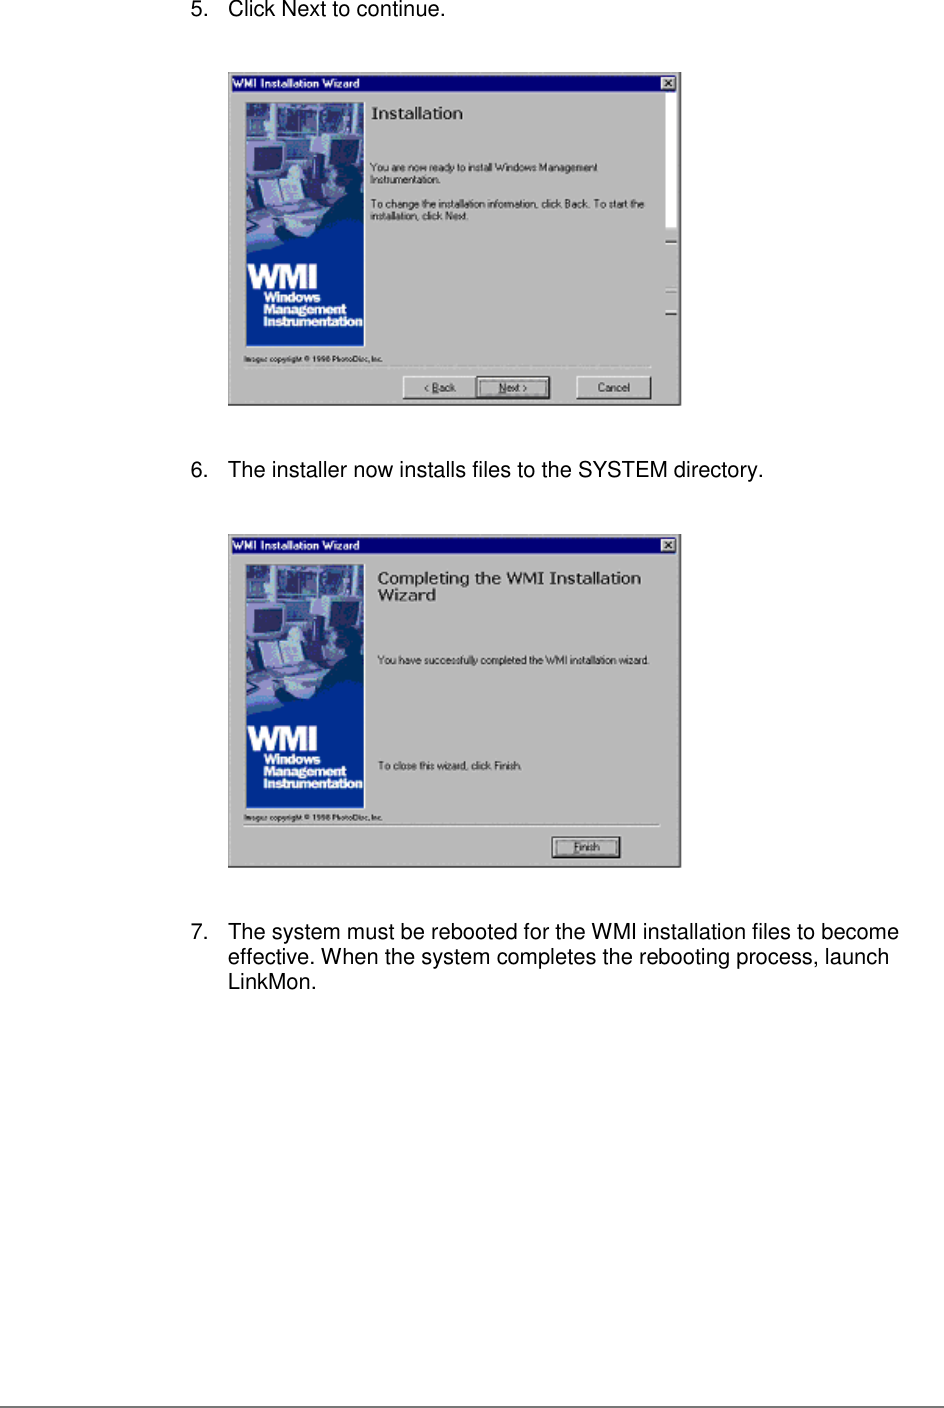 5.  Click Next to continue.6.  The installer now installs files to the SYSTEM directory.7.  The system must be rebooted for the WMI installation files to becomeeffective. When the system completes the rebooting process, launchLinkMon.